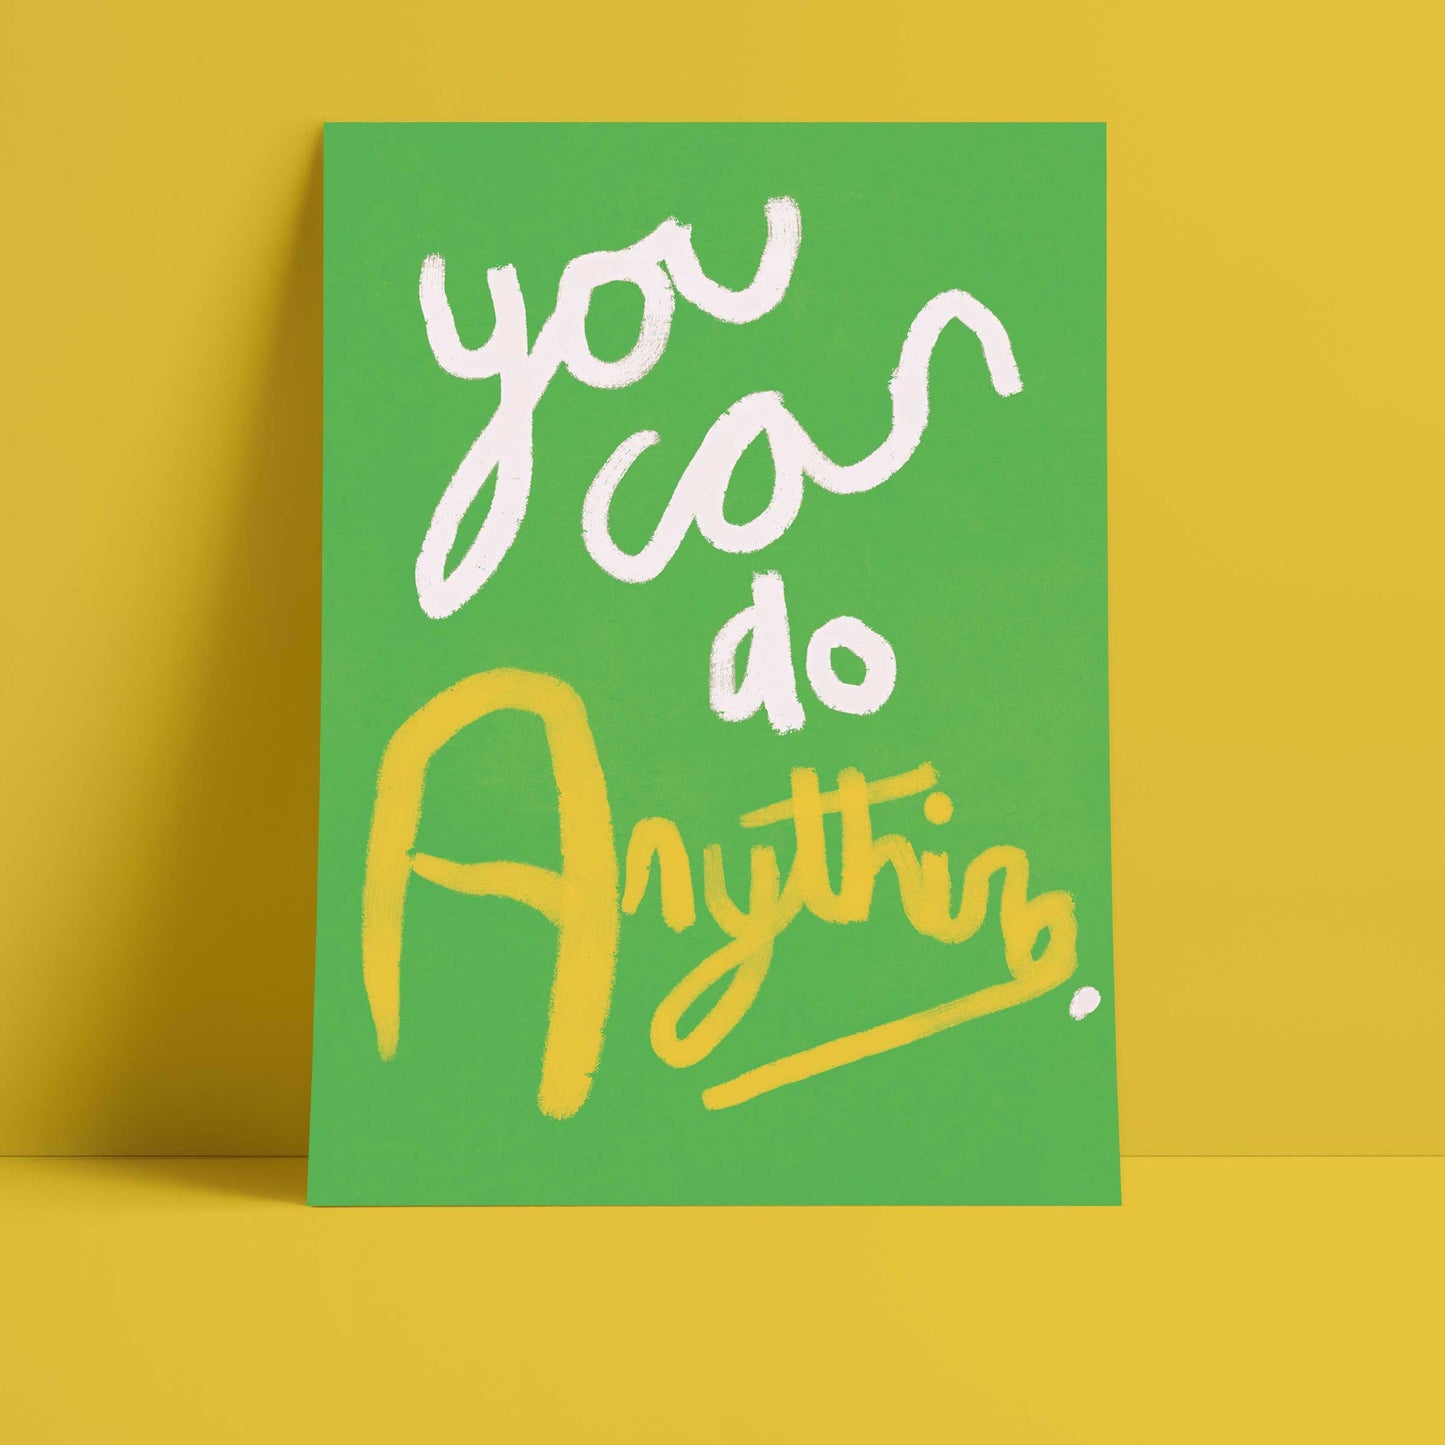 You Can Do Anything Print - Green, White, Yellow Fine Art Print